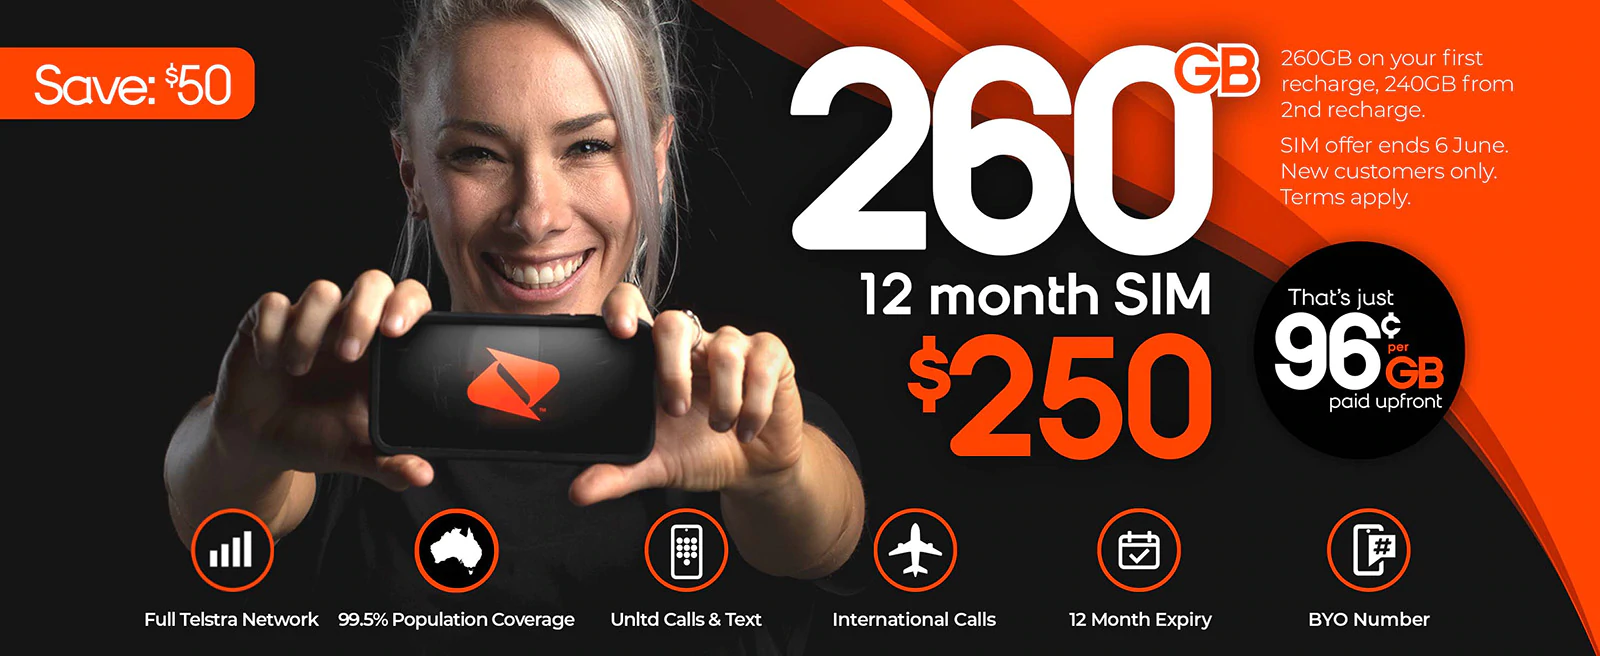 Save $50 OFF on $300 Prepaid SIM - Now $250 with 260 GB